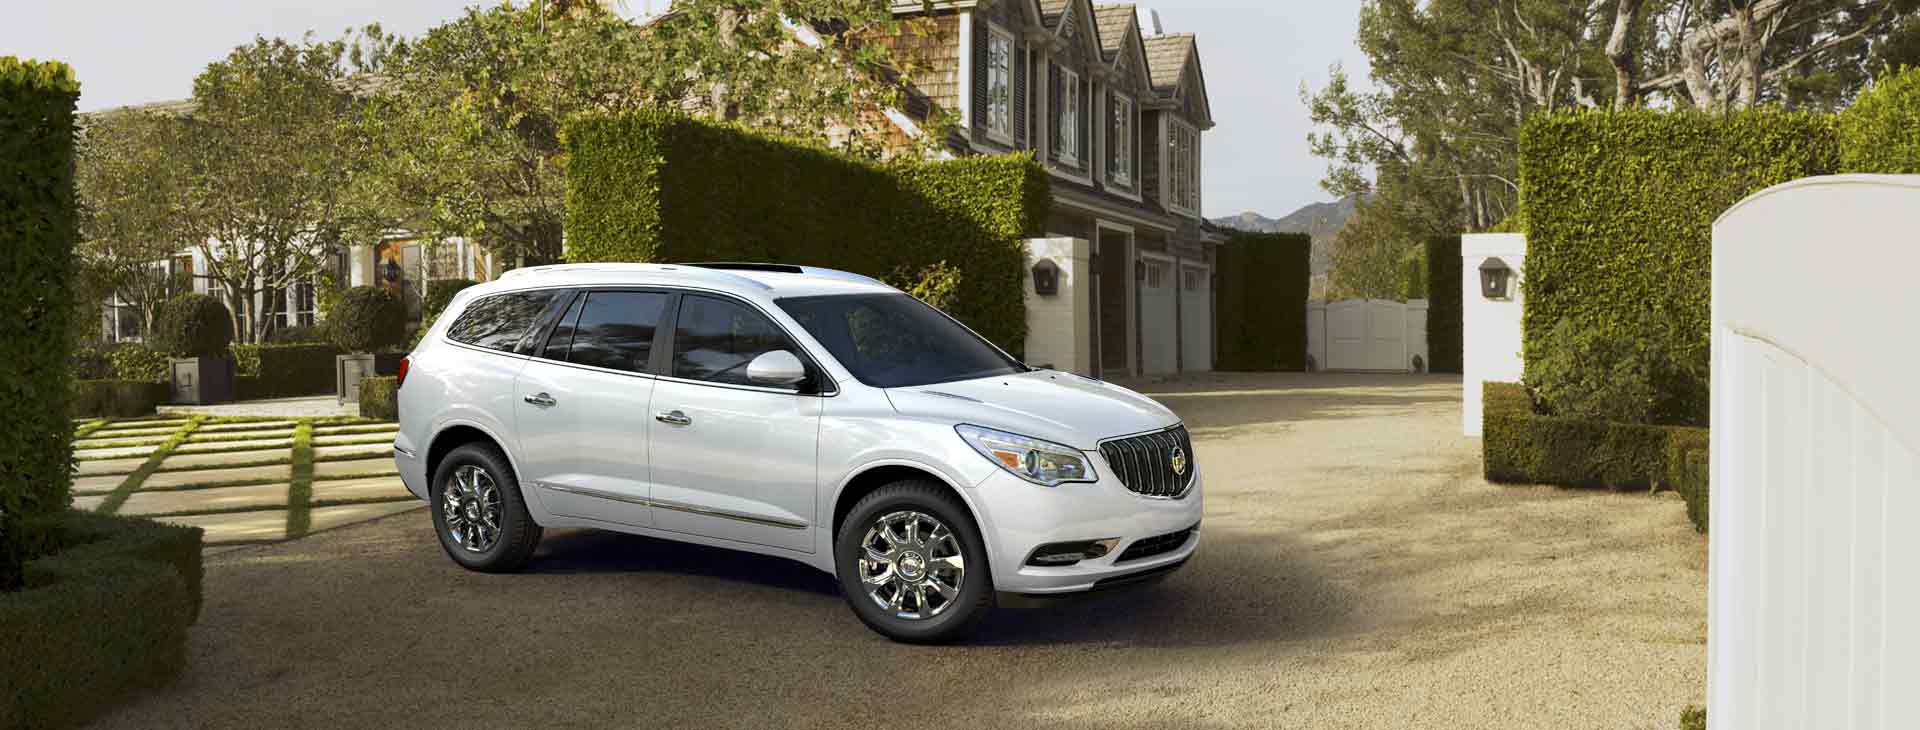 Here Are The 2016 Buick Enclave Colors | GM Authority